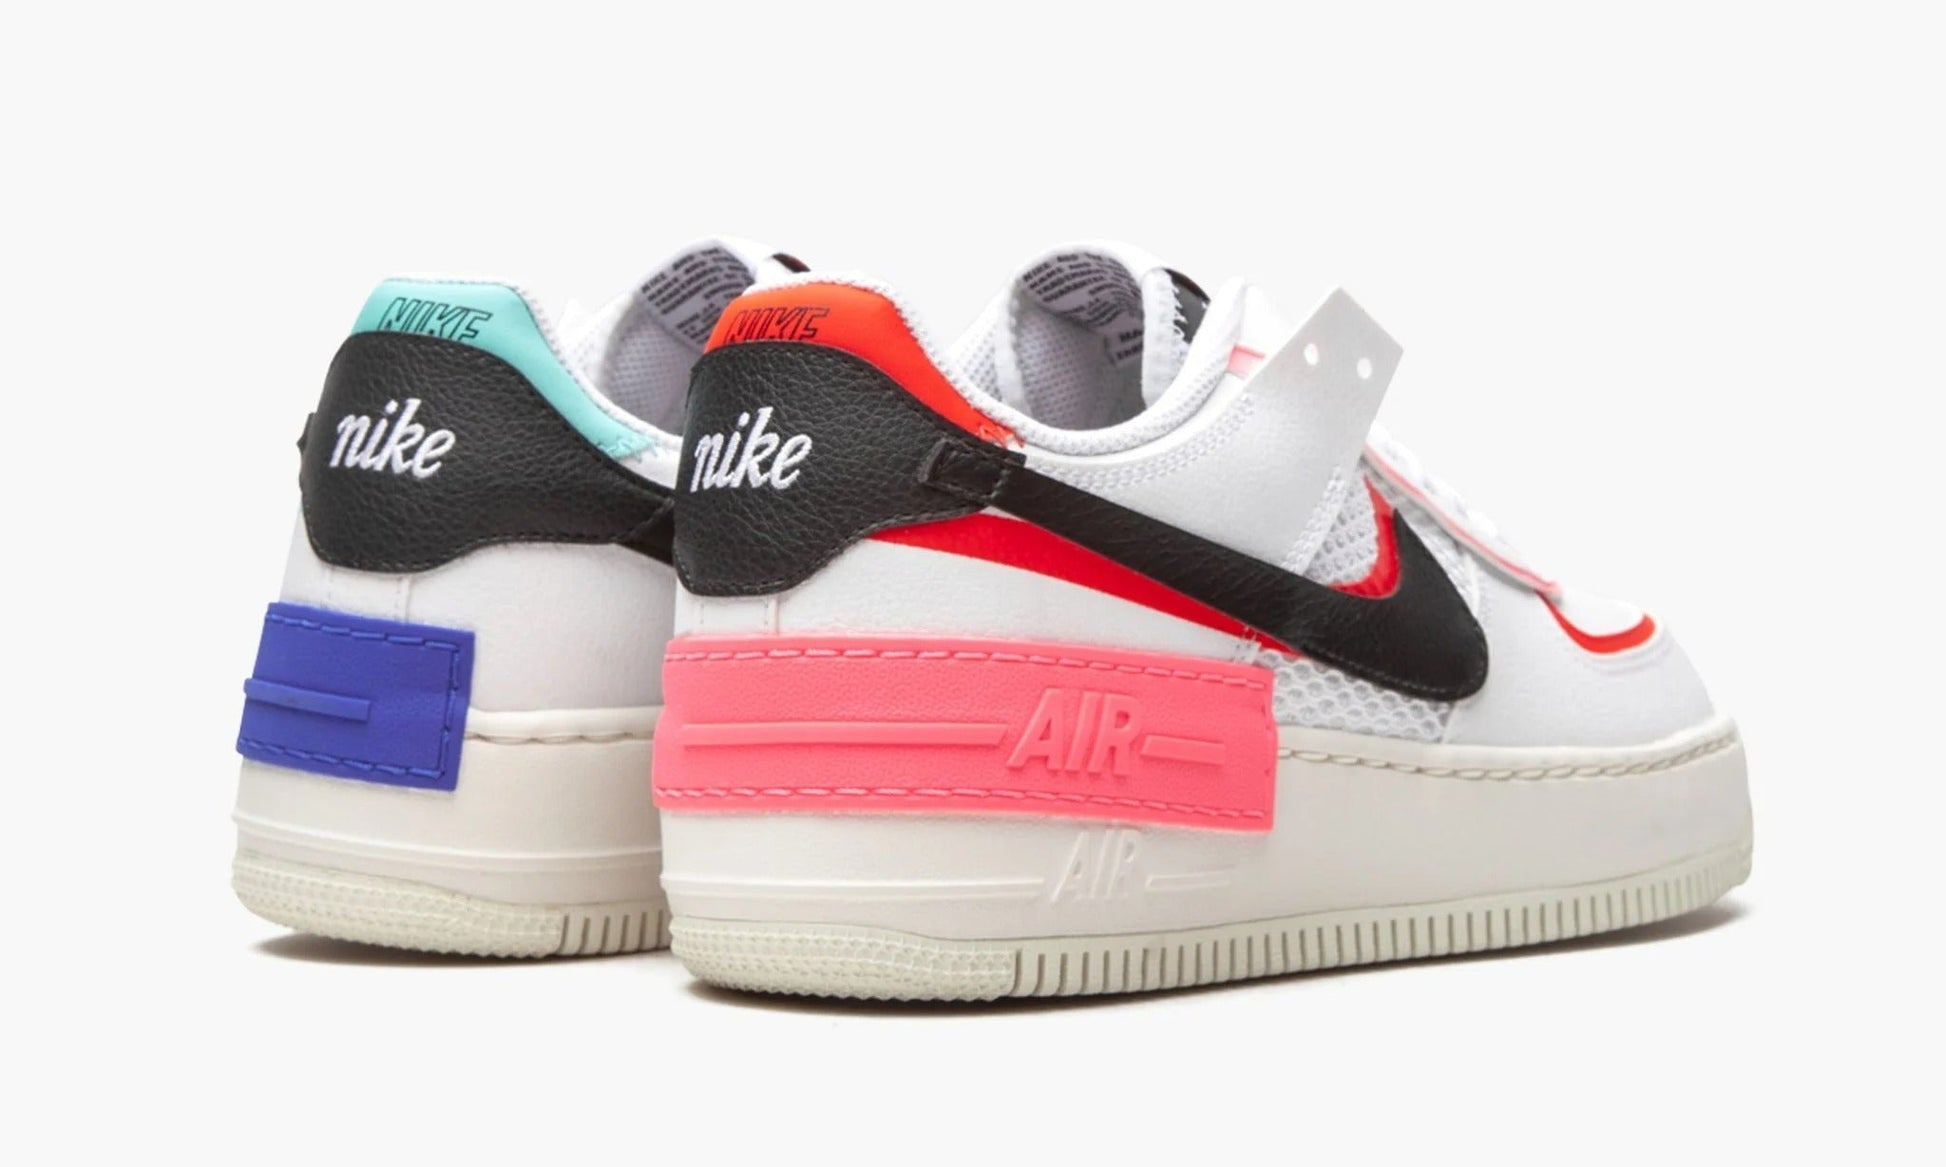 Air Force 1 Low Shadow WMNS White Multicolor - DH1965 100 